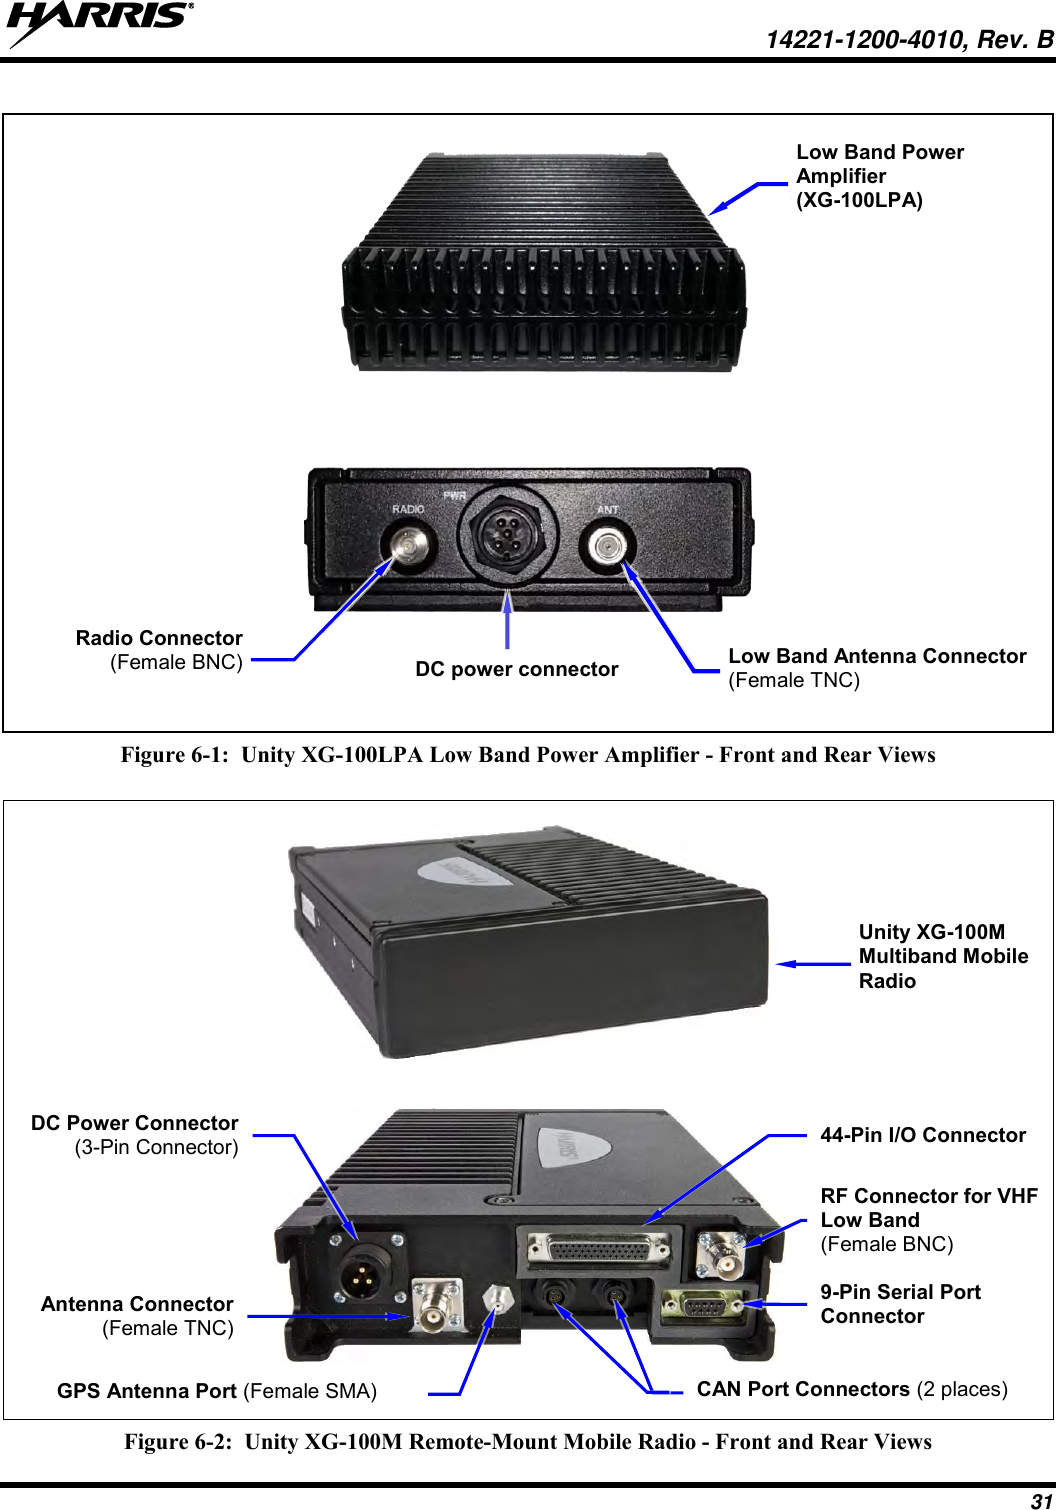   14221-1200-4010, Rev. B 31    Figure 6-1:  Unity XG-100LPA Low Band Power Amplifier - Front and Rear Views    Figure 6-2:  Unity XG-100M Remote-Mount Mobile Radio - Front and Rear Views CAN Port Connectors (2 places) Antenna Connector (Female TNC) DC Power Connector (3-Pin Connector) GPS Antenna Port (Female SMA) 44-Pin I/O Connector 9-Pin Serial Port Connector RF Connector for VHF Low Band (Female BNC)  Low Band Power Amplifier  (XG-100LPA)  Radio Connector (Female BNC) Low Band Antenna Connector (Female TNC)  DC power connector Unity XG-100M Multiband Mobile Radio 